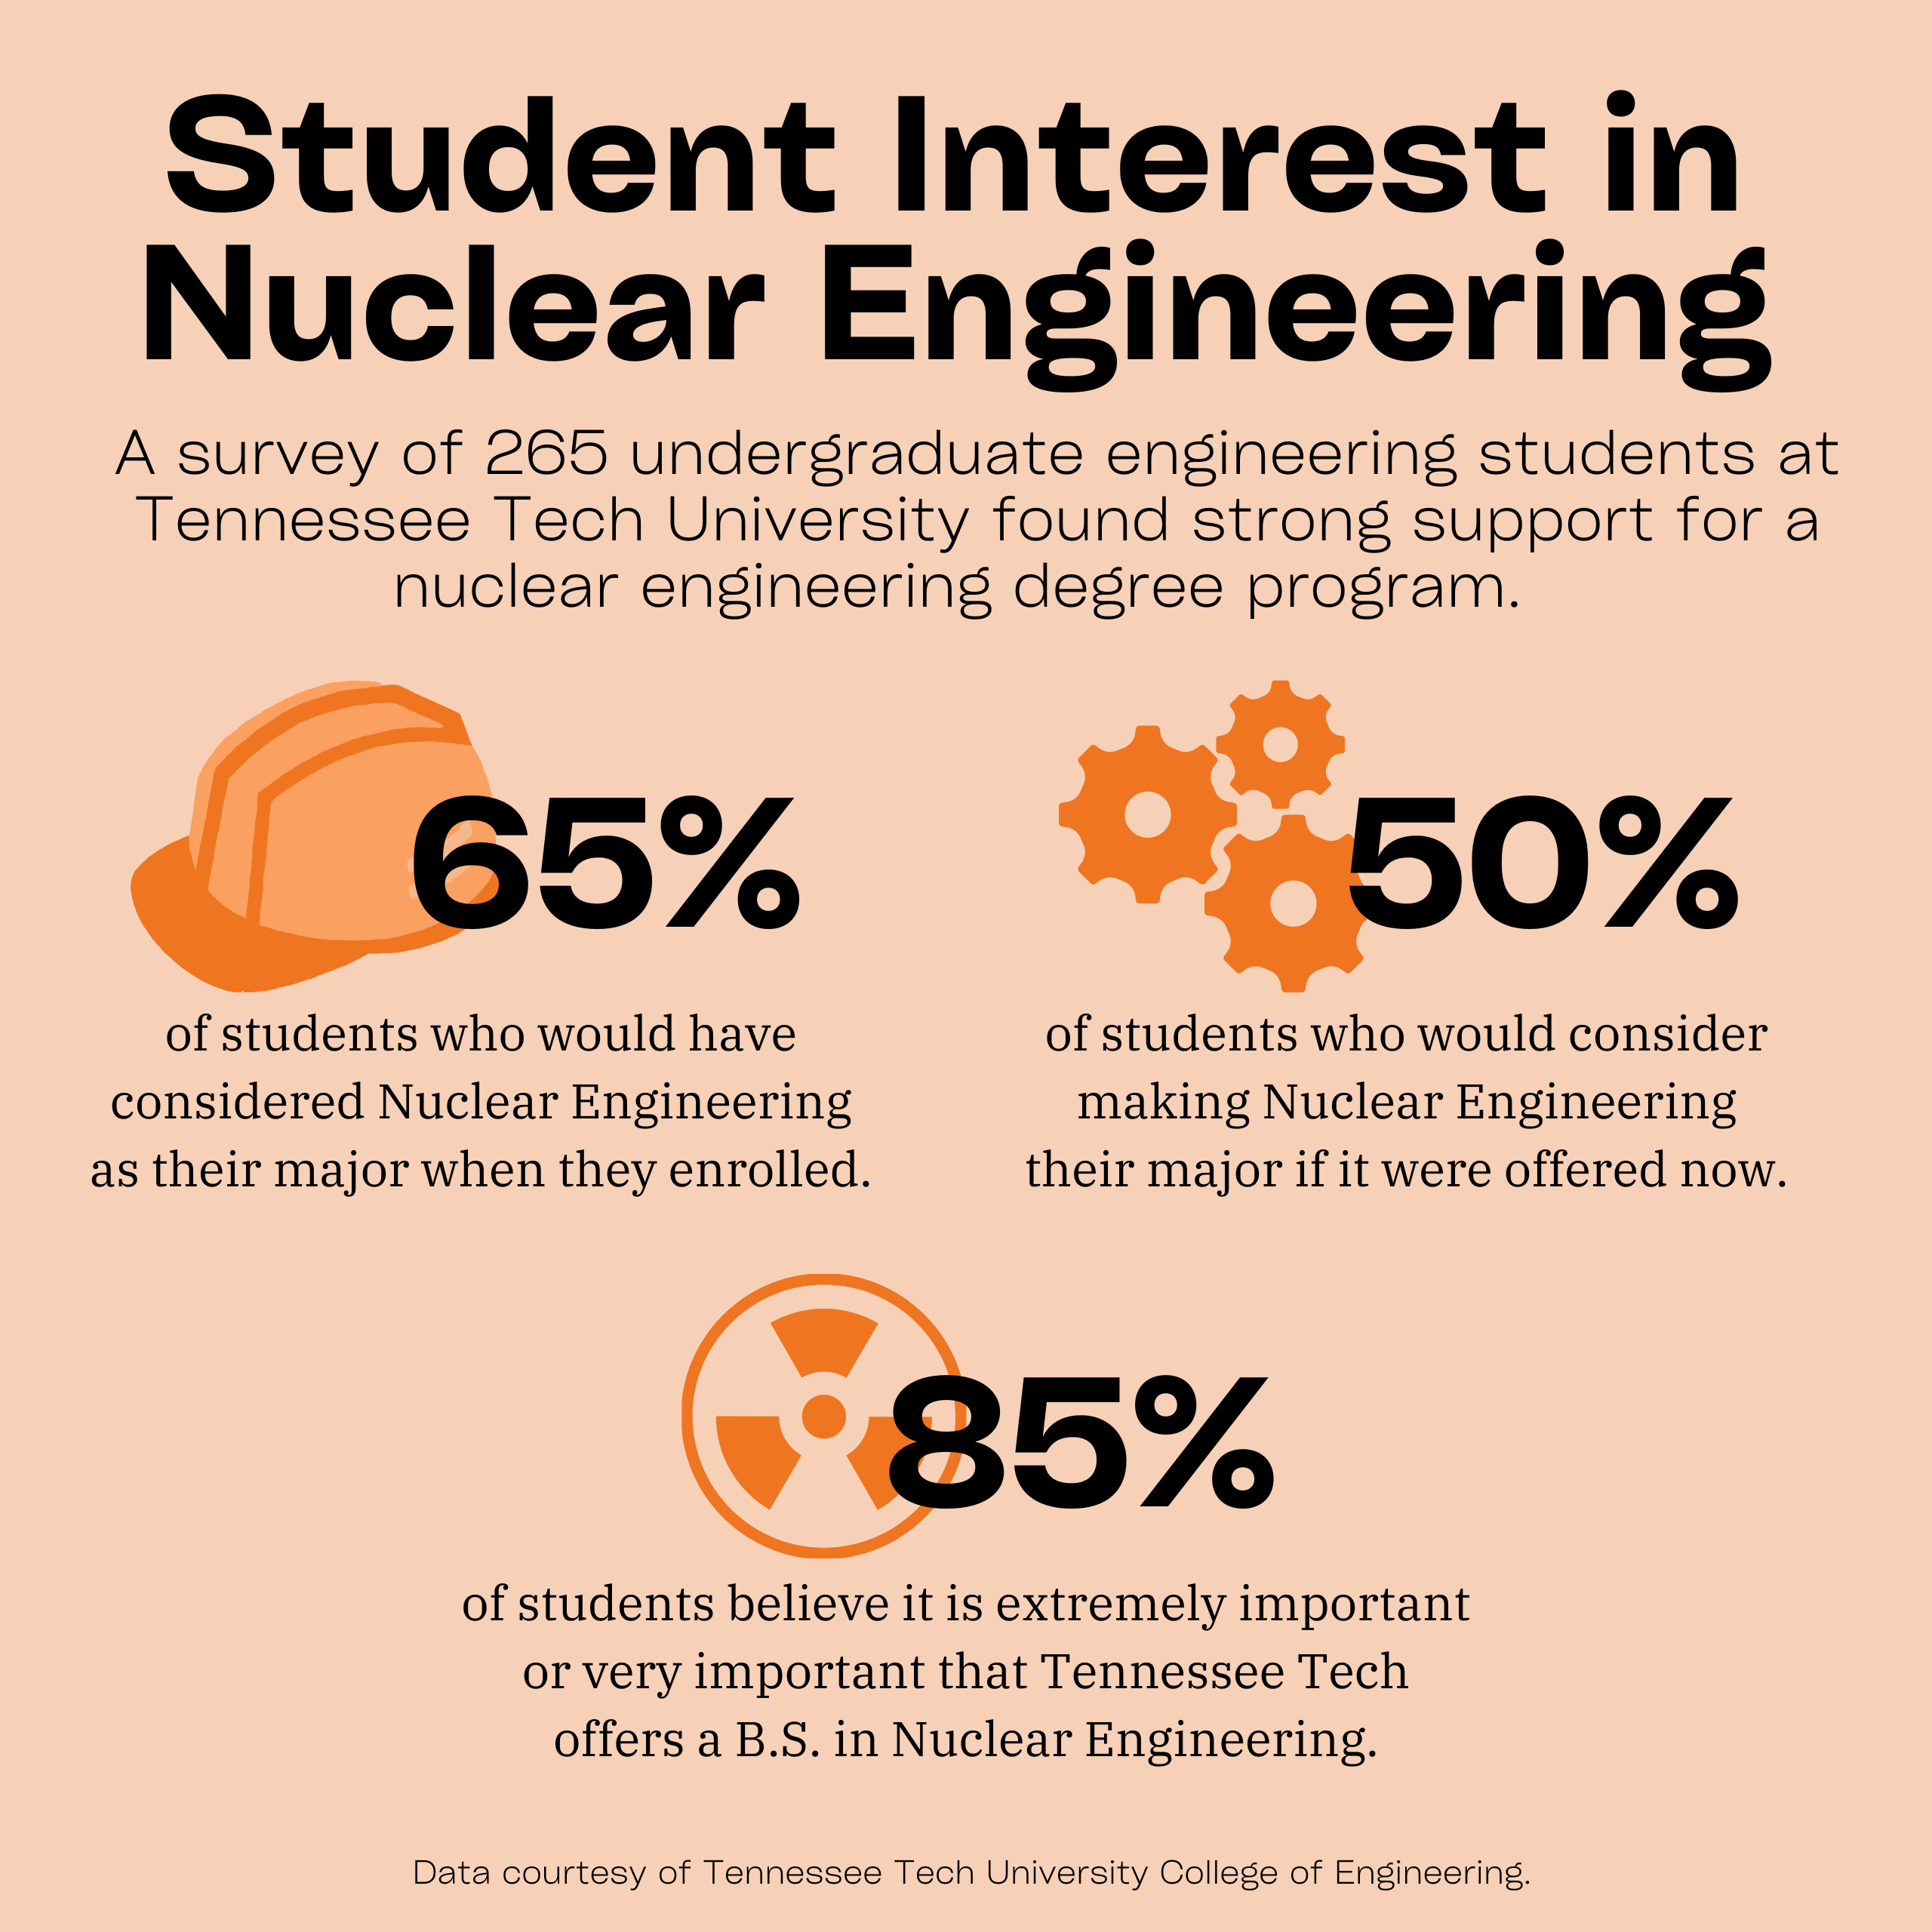 Student survey data from Tennessee Tech's College of Engineering